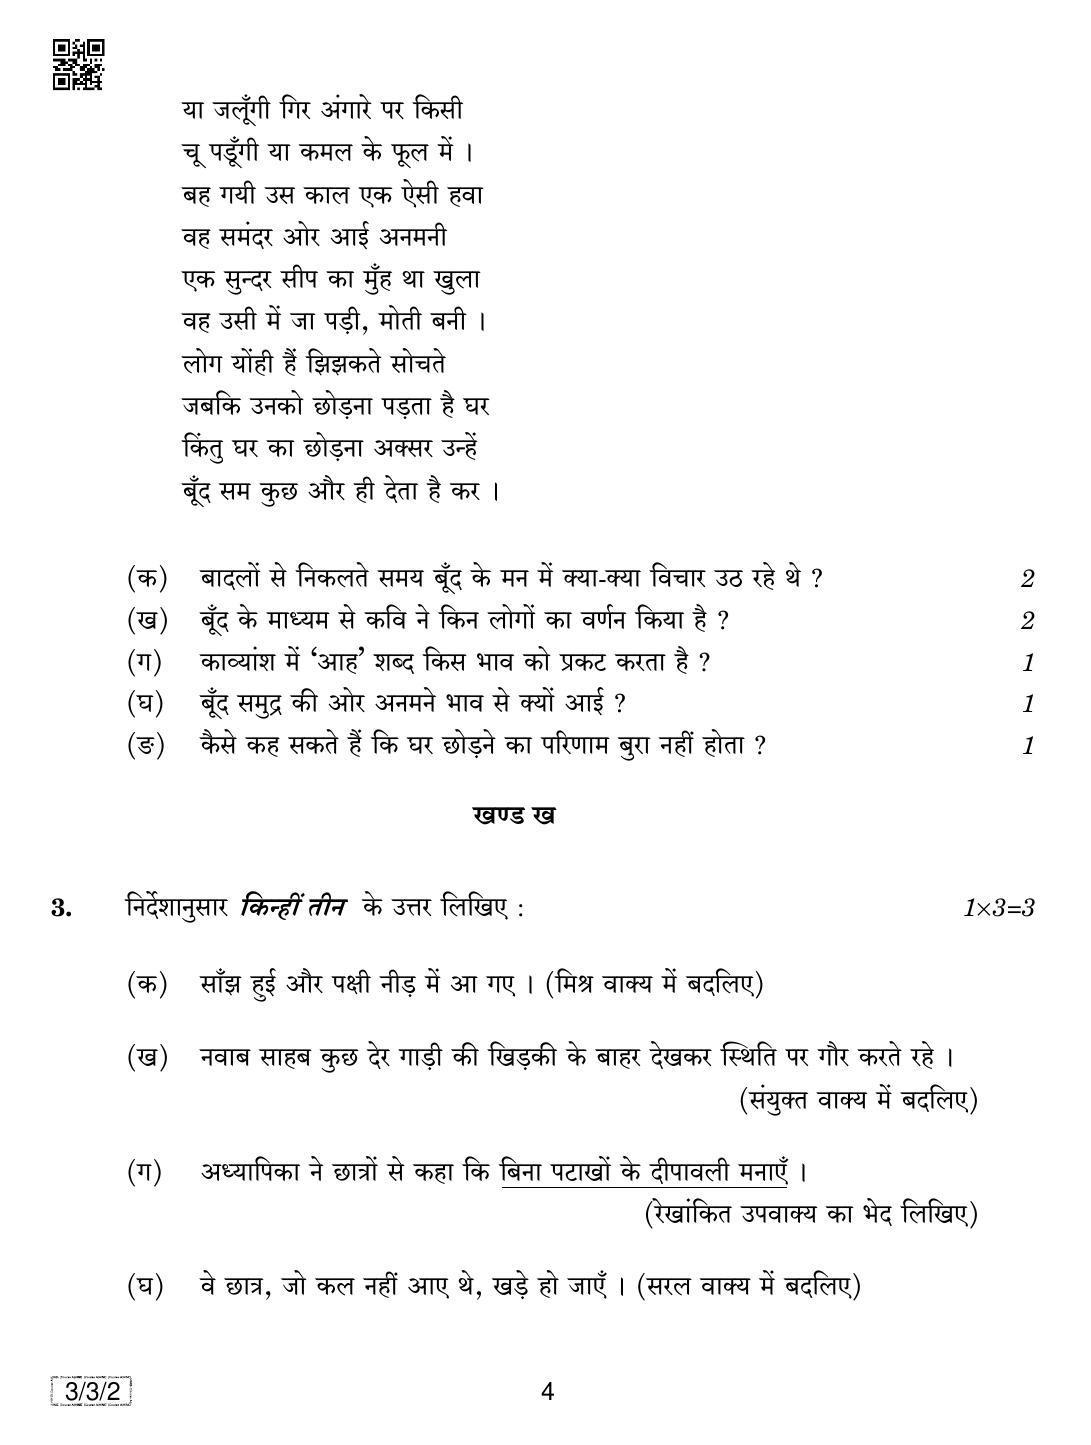 CBSE Class 10 3-3-2 HINDI COURSE- A 2019 Question Paper - Page 4